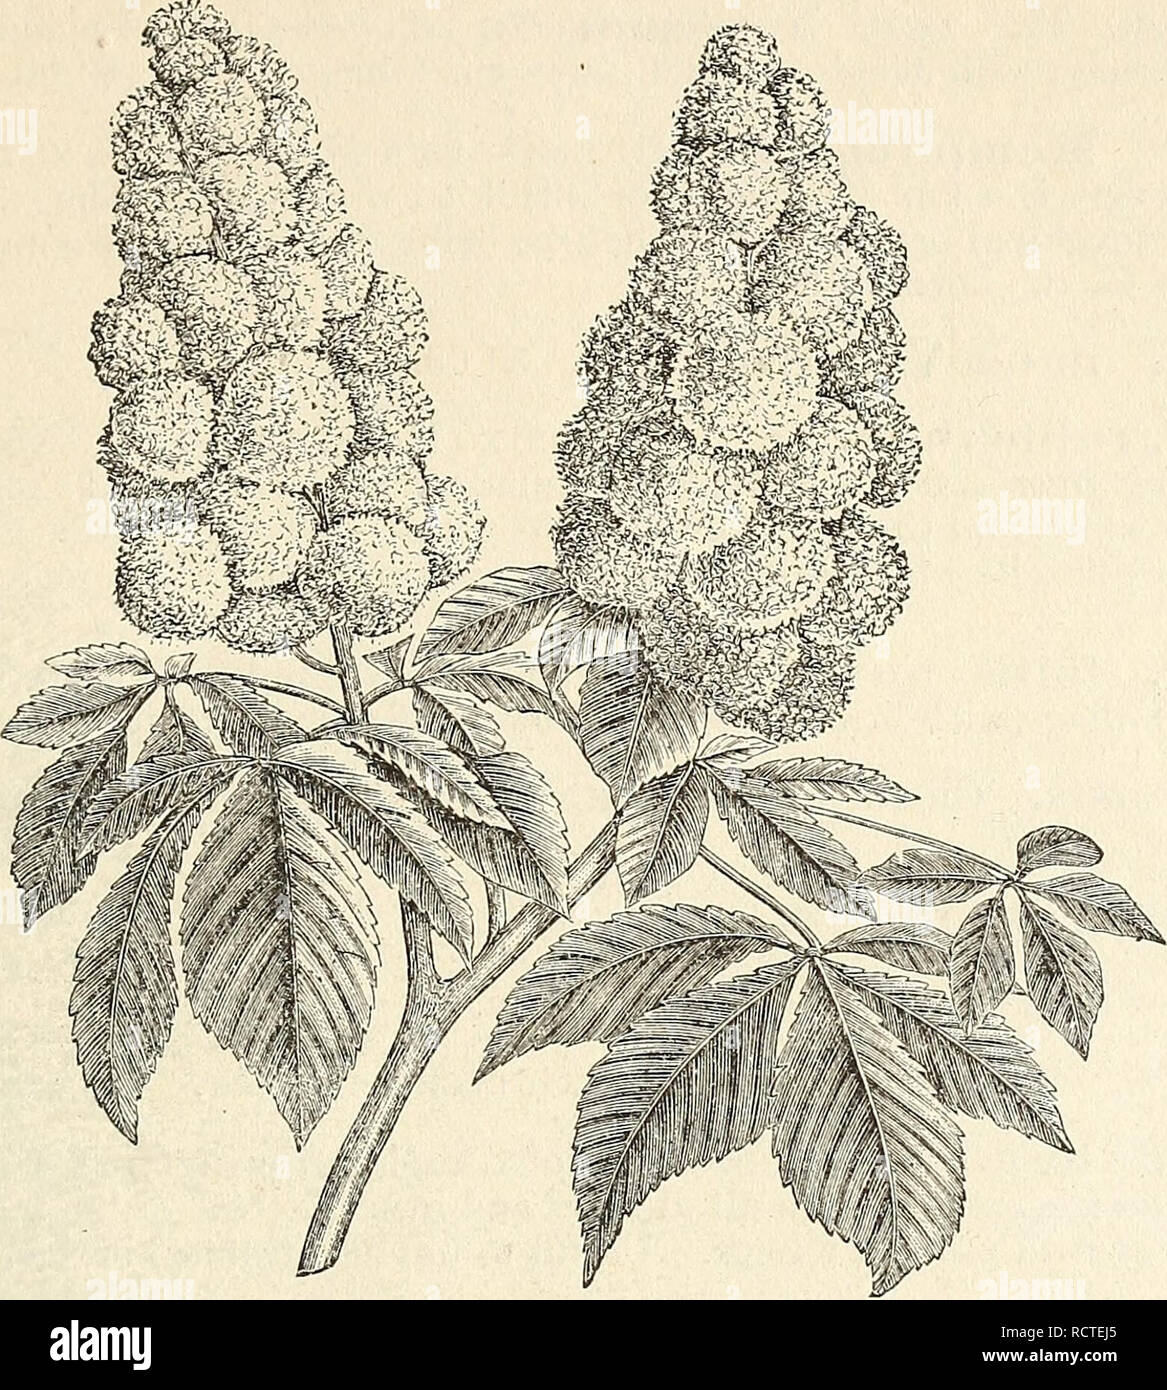 . Descriptive catalogue of hardy ornamental trees, shrubs, herbaceous perennial pants, etc. : twenty-seventh edition. Ornamental trees Catalogs; Shrubs Catalogs; Roses Catalogs; Flowers Catalogs. ORNAMENIAL TREES, SHRUBS, ETC. 13. HOESE CHESTNUT, DOUBLE FEOWERING. (REDUCED SIZE.) Acer spicatum. A very attractive native species, of moderate growth; leaves medium size, rough, three to five lobed, somewhat pointed ; flowers greenish, in closely branched clusters, becoming pendulous. 75 cents. Acer Tataricum. Tartarian Maple. A native of South-easternl Europe, of medium size, and rounded form; lea Stock Photo